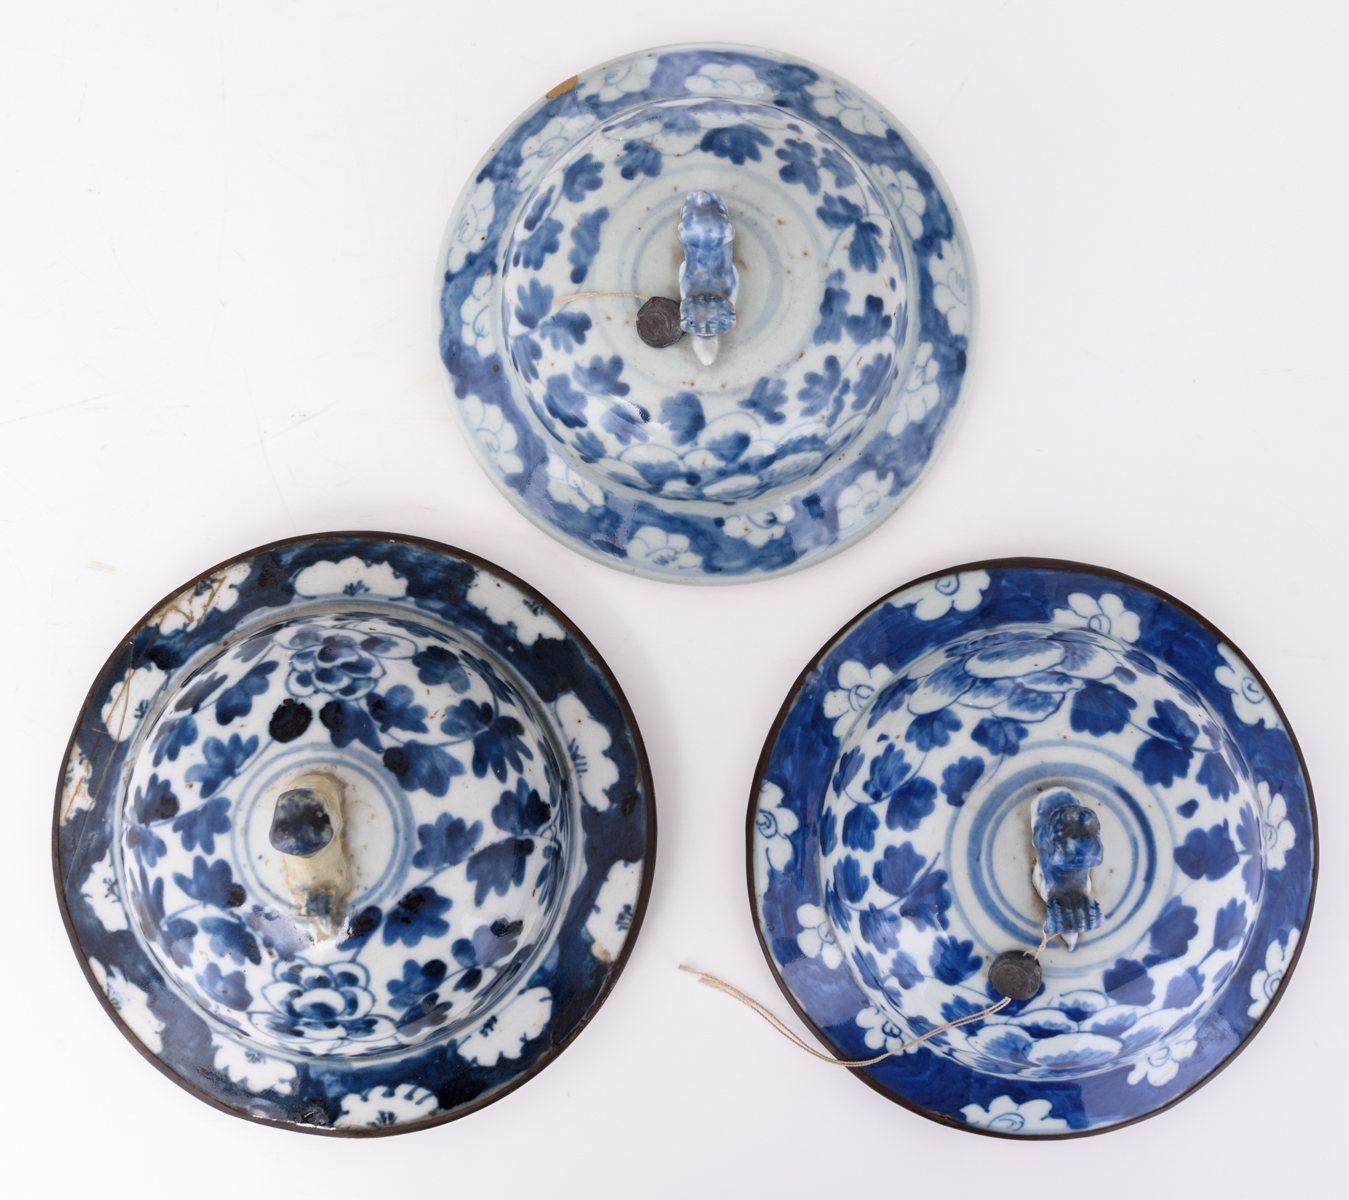 Three Chinese blue and white floral decorated pots and covers, 18th/19thC, H 43,5 - 45 cm - Image 7 of 8